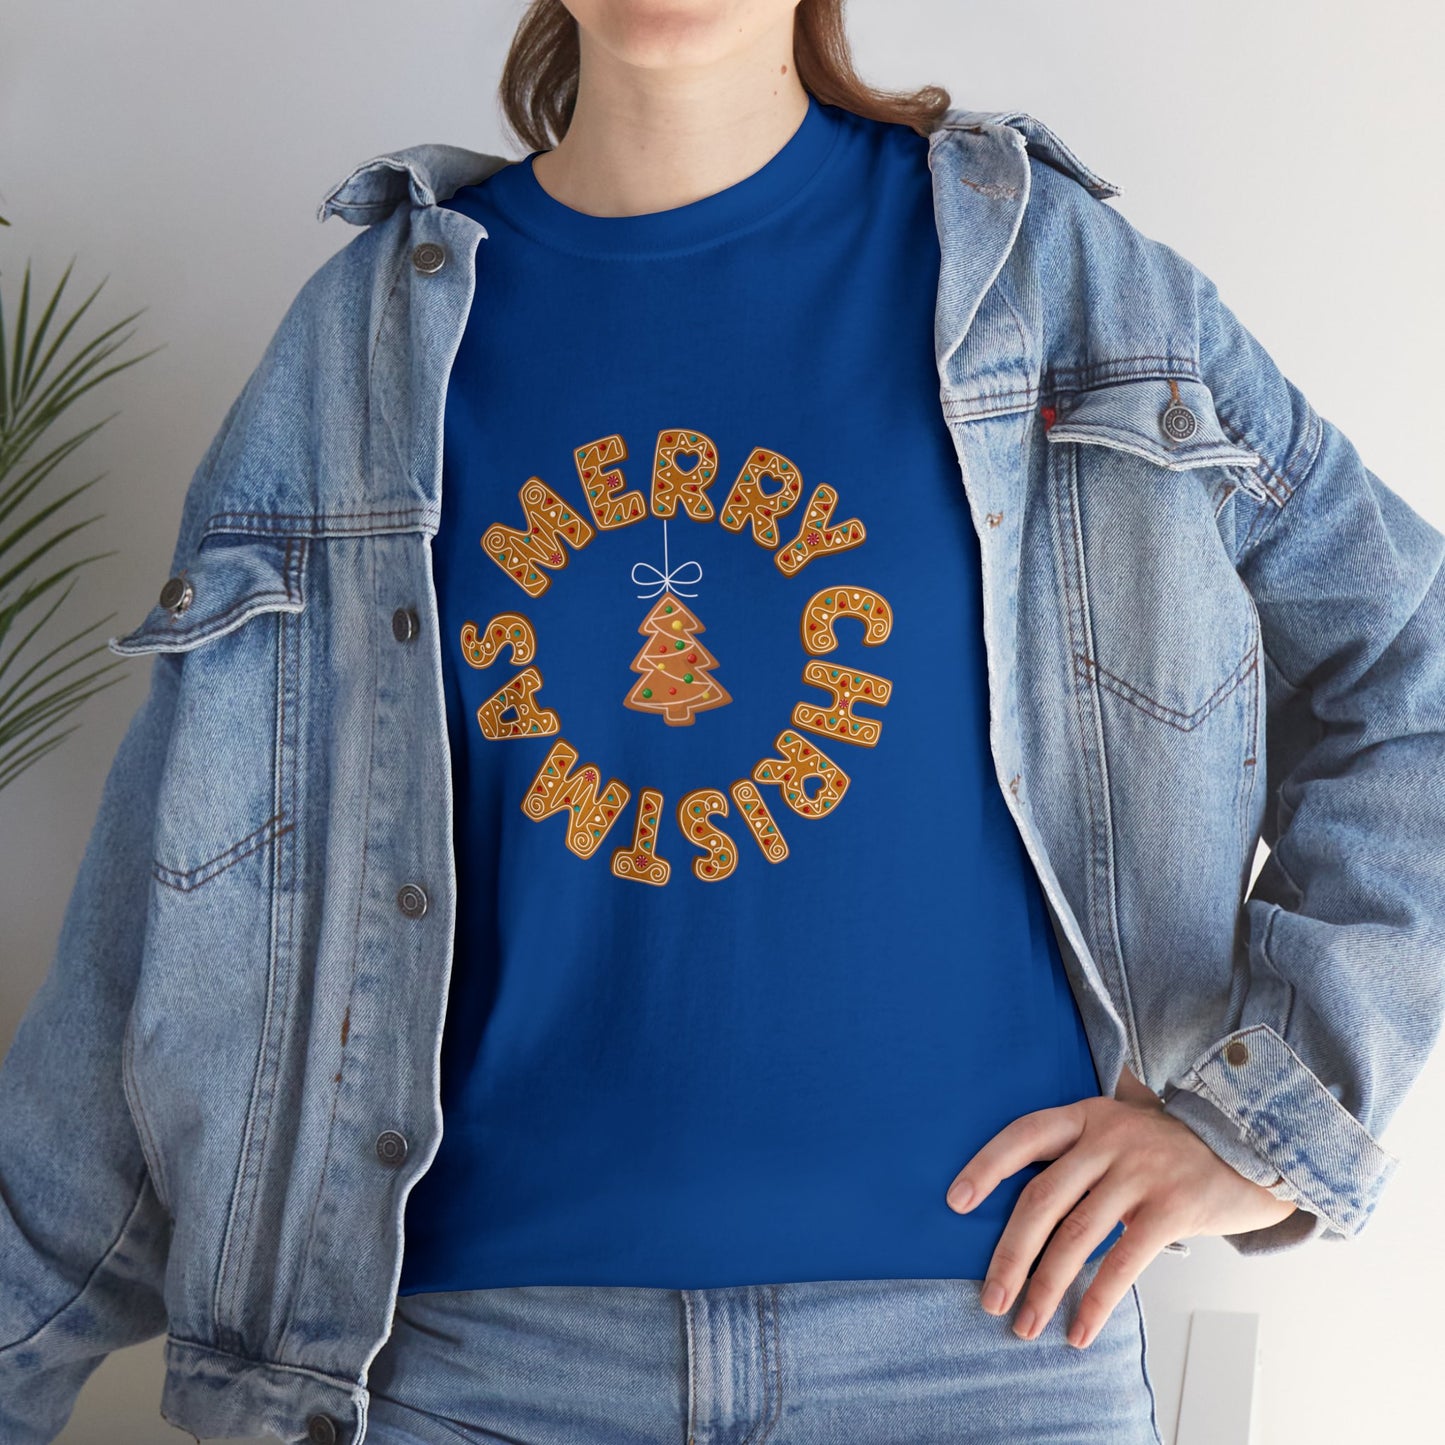 Holiday, Christmas. A woman is wearing a Christmas t-shirt with a wreath made out of gingerbread cookies and spells out Merry Christmas. A Christmas tree cookie dangles in the middle of the wreath.